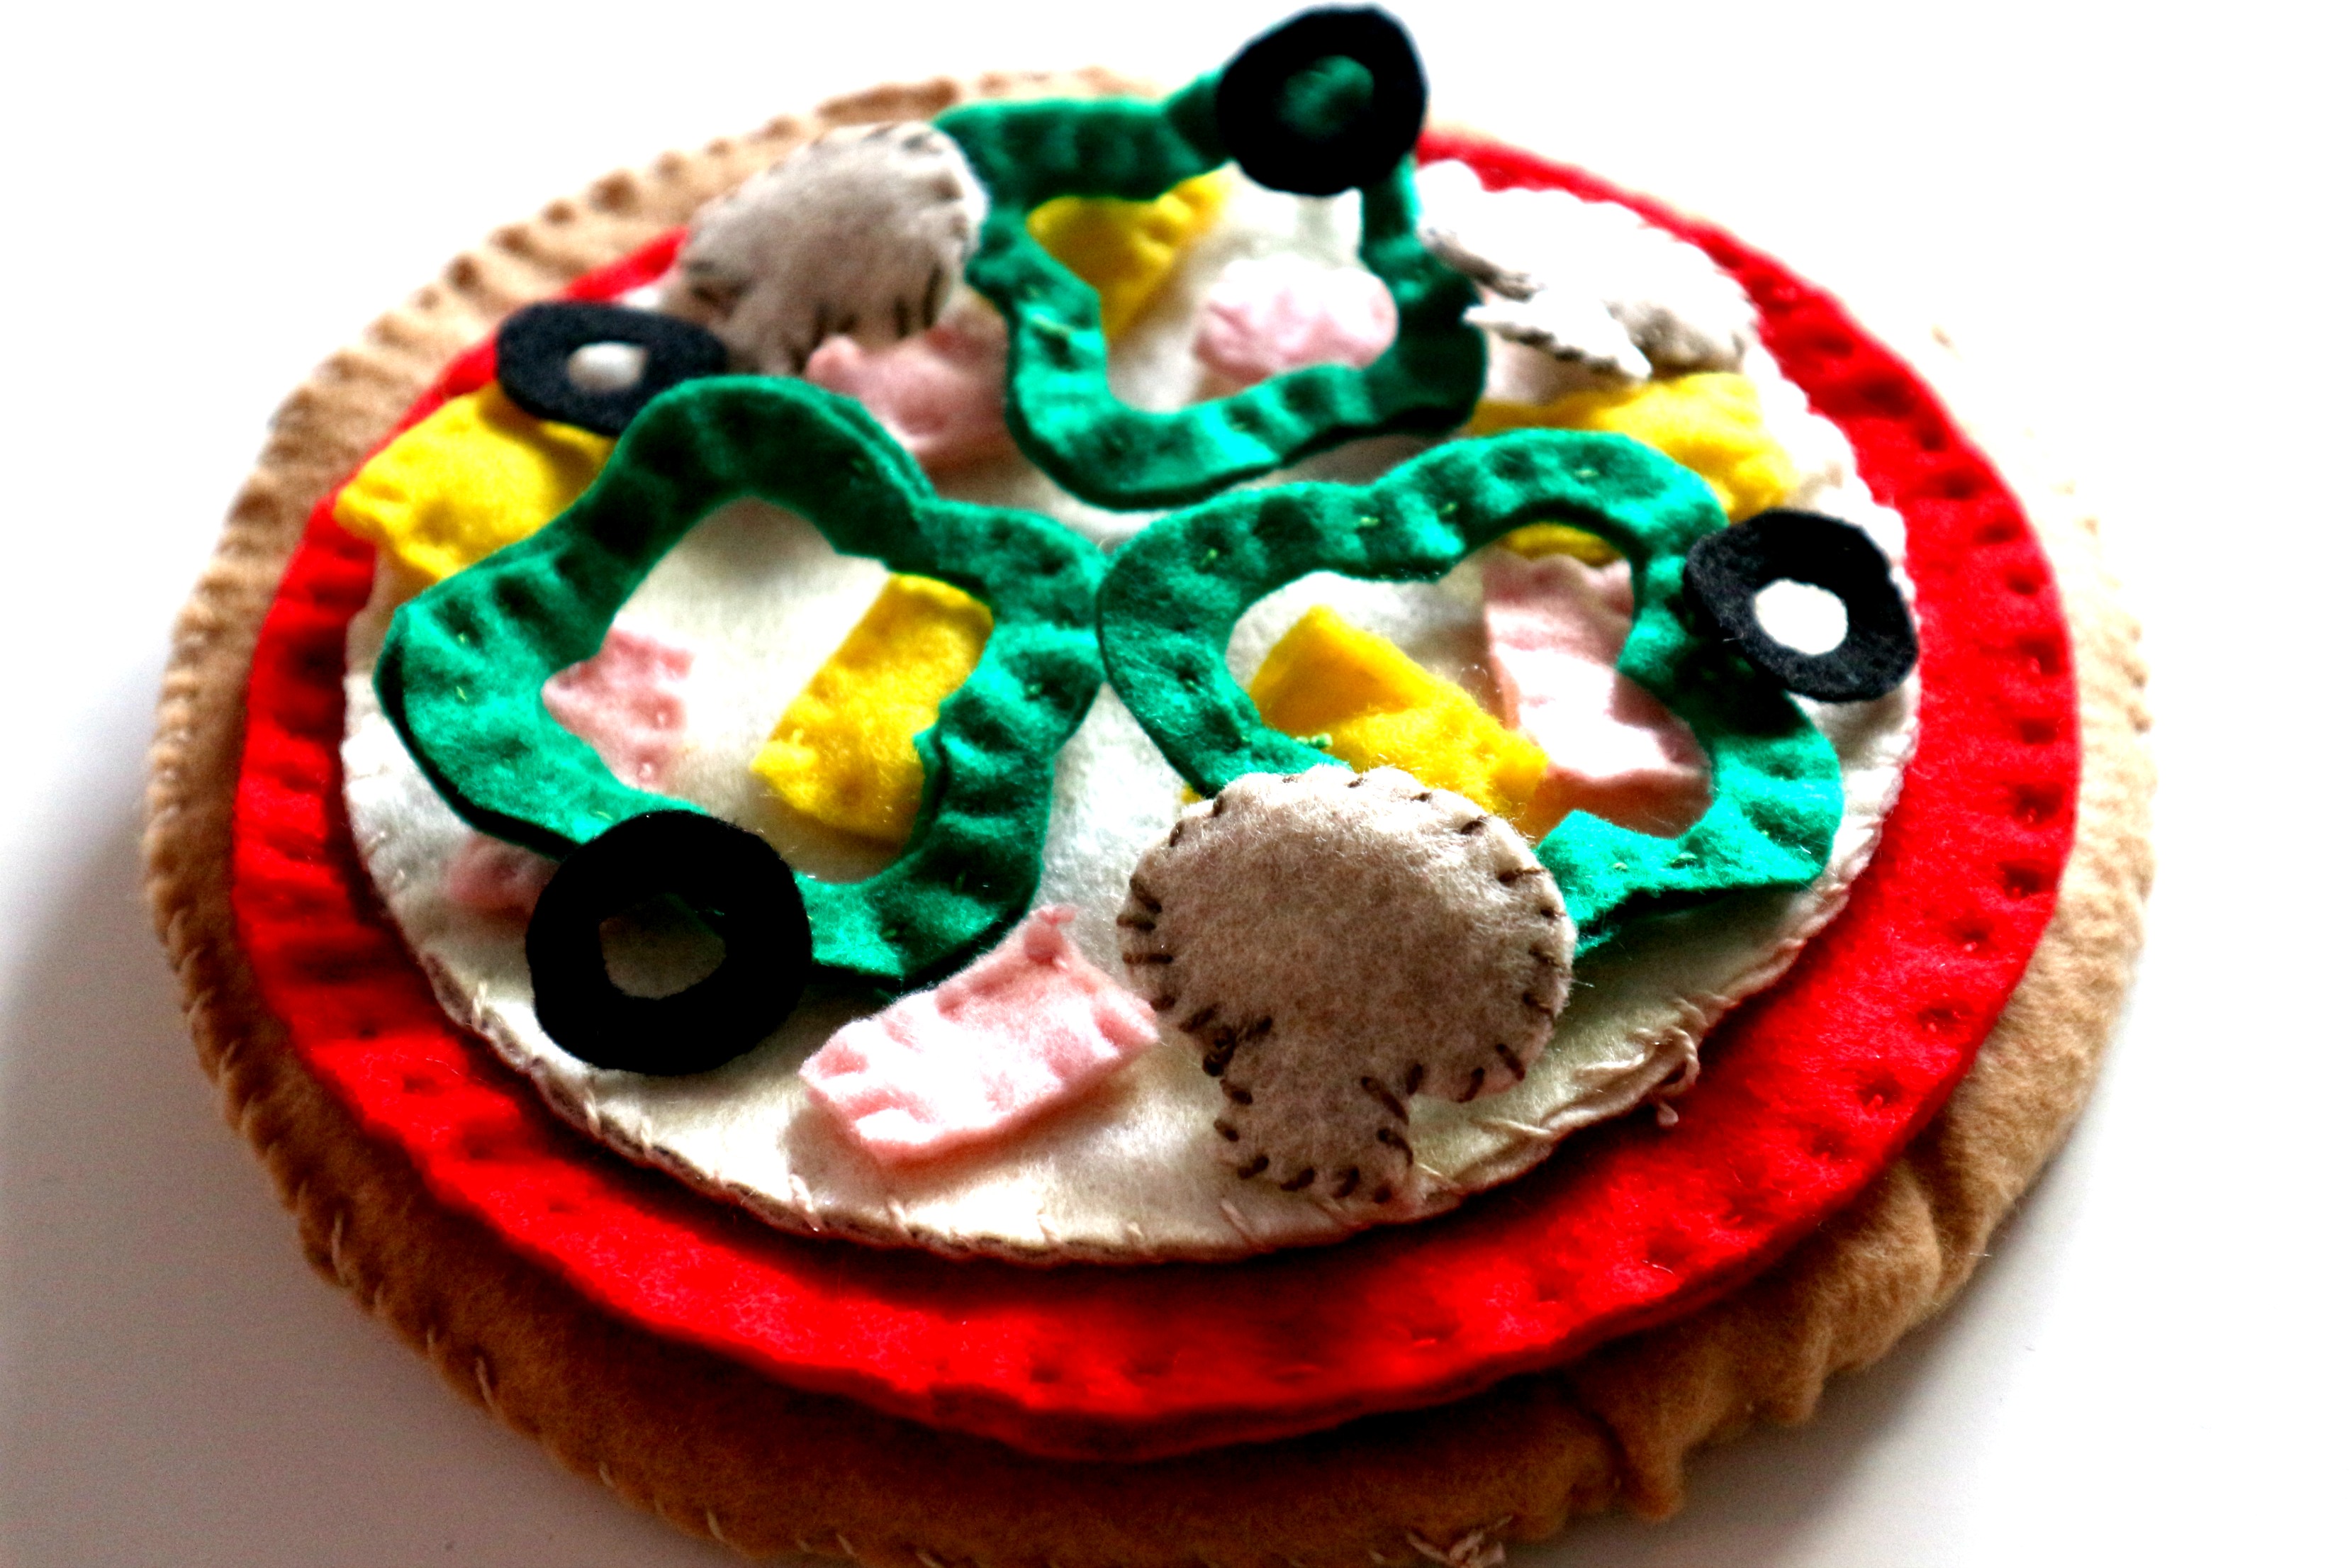 How to make a felt pizza toy for kids! Easy fun sewing project! mybrightideasblog.com